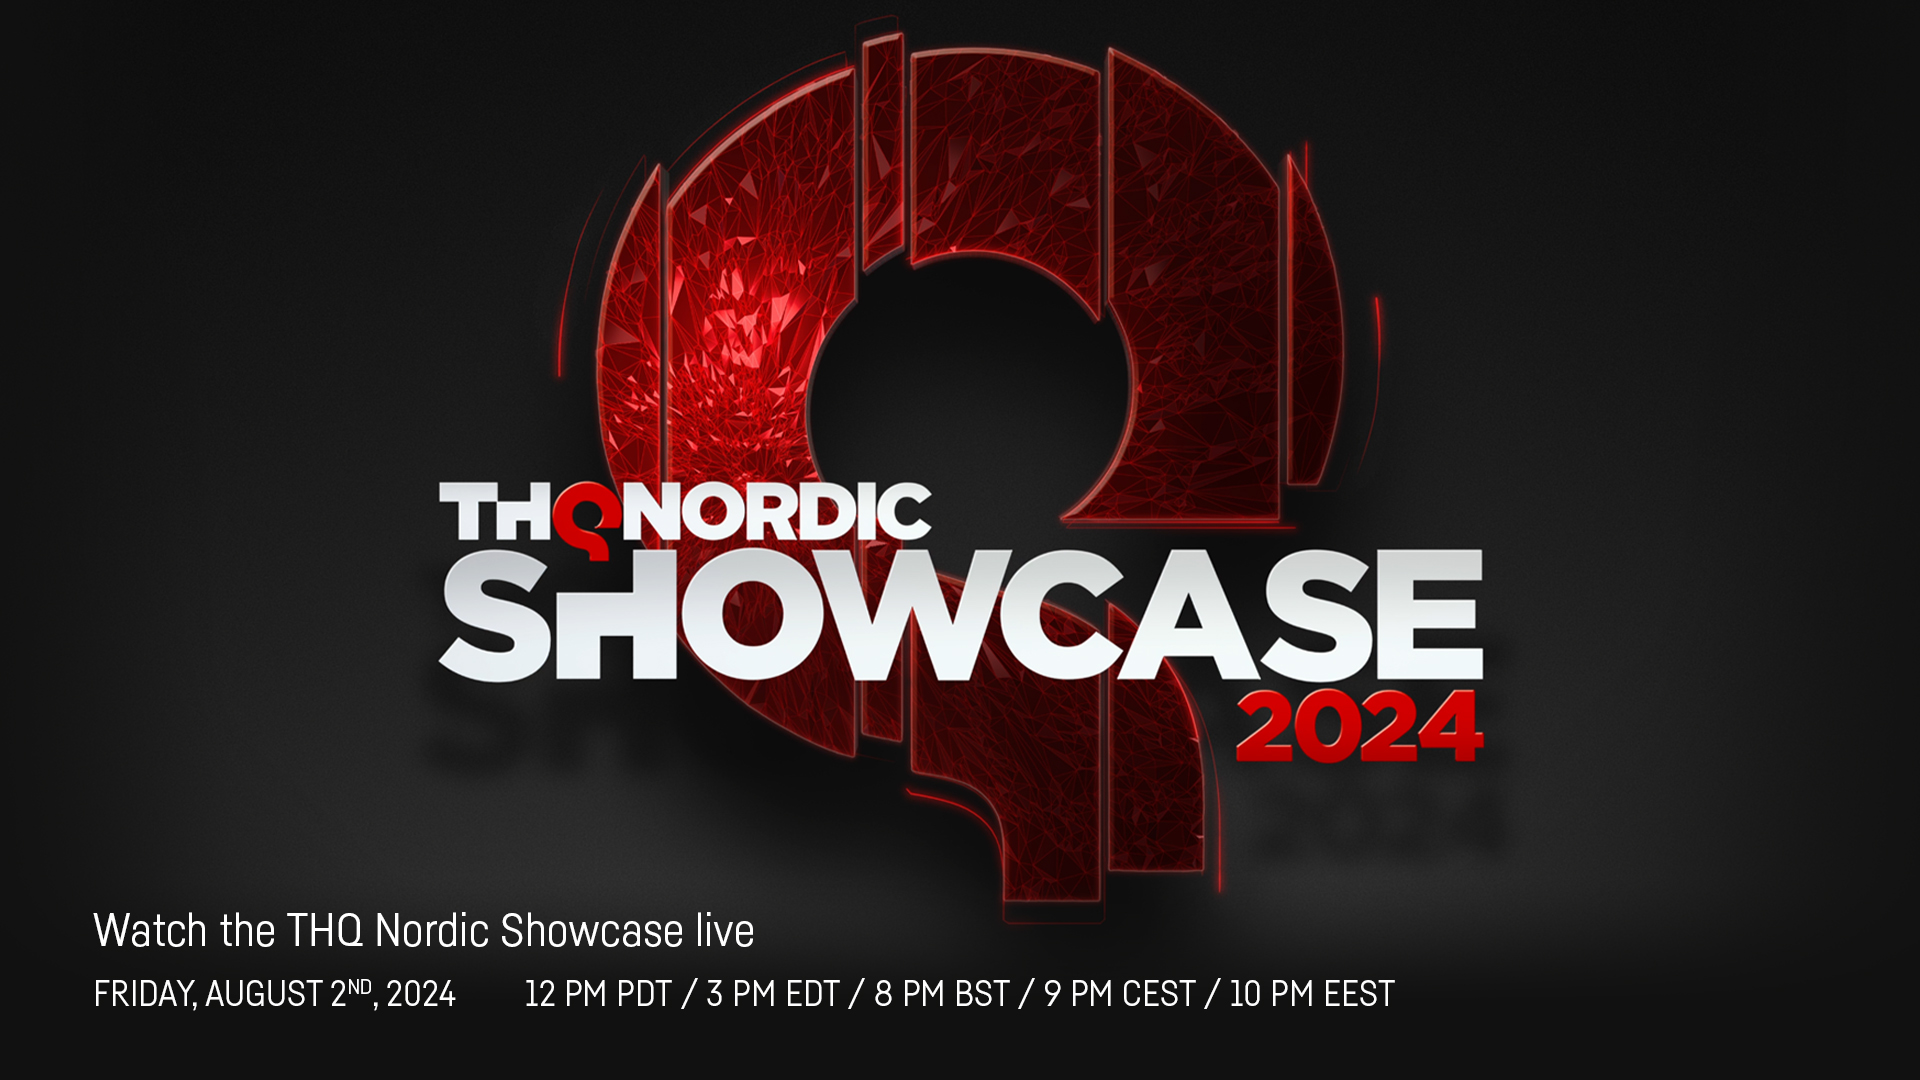 A banner image for THQ Nordic's 2024 showcase.